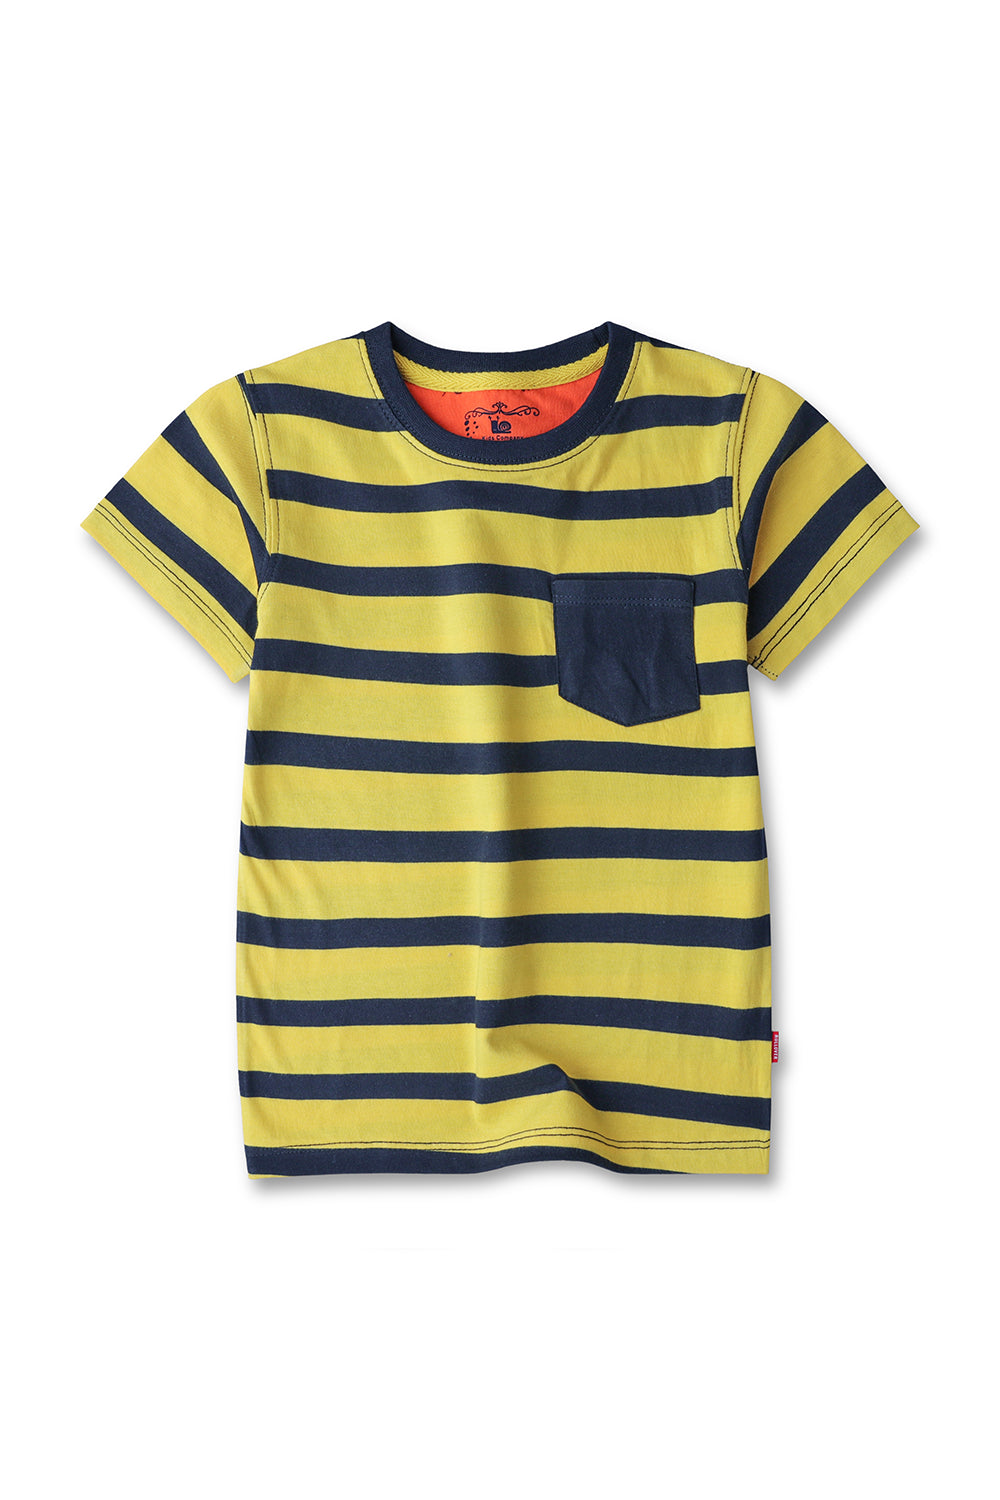 Boys Yellow and Black Striped Tshirt with Front Pocket